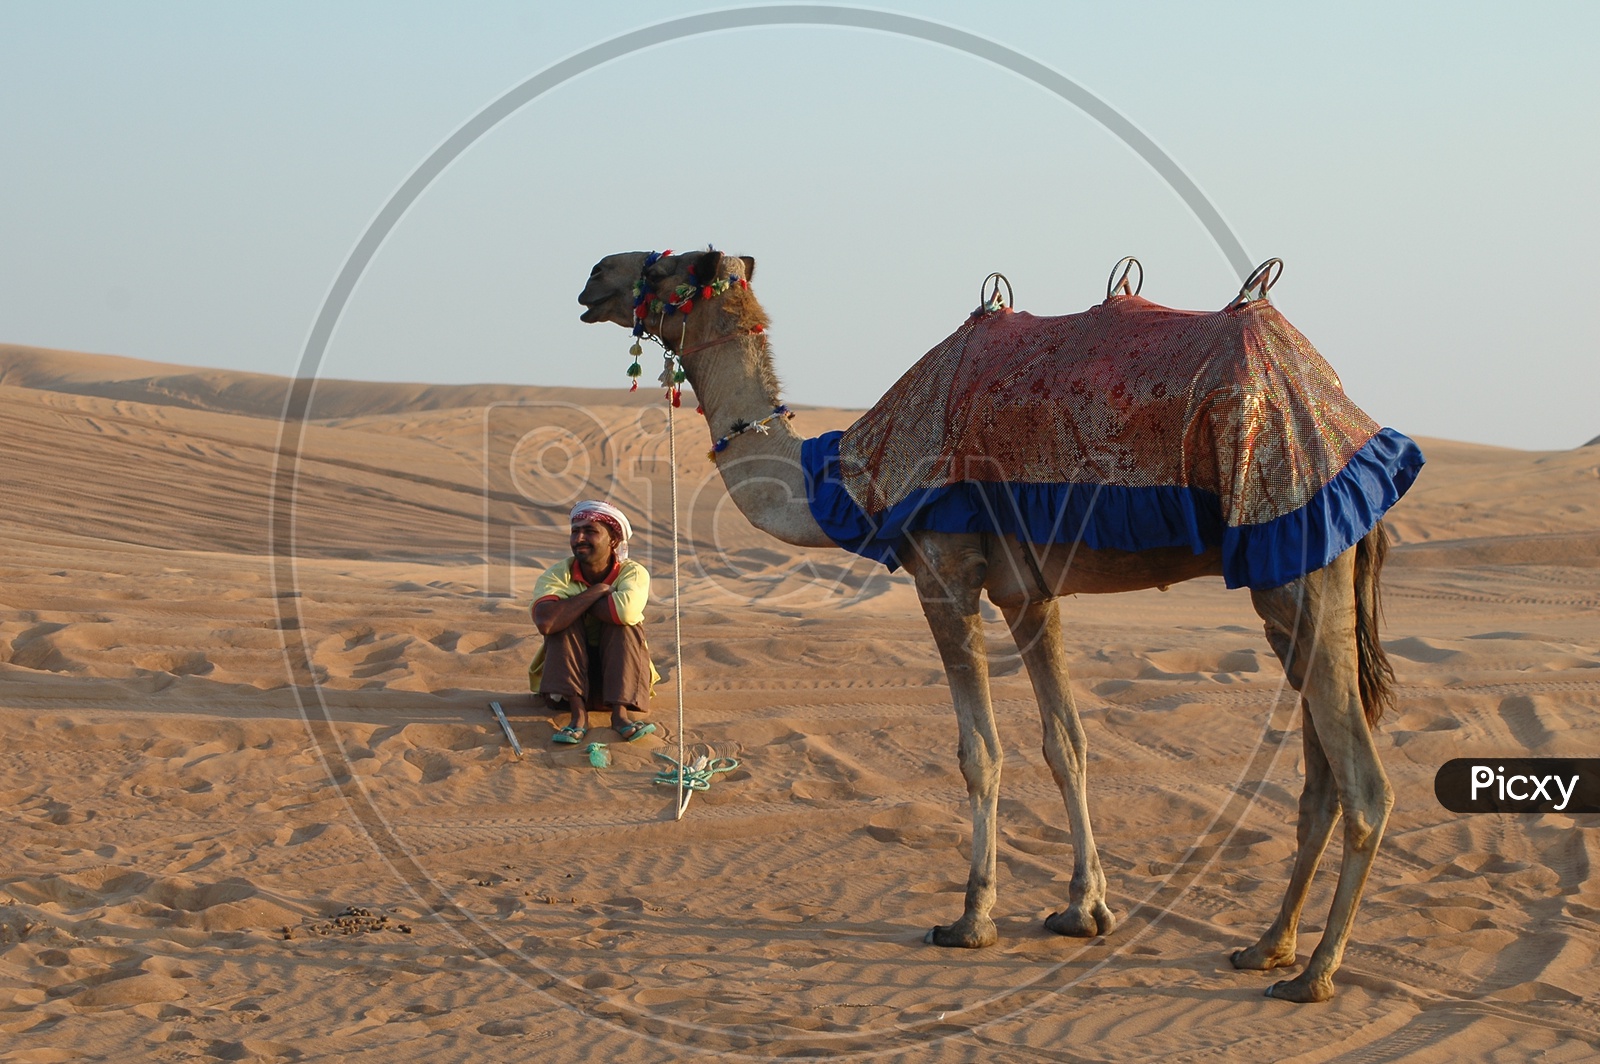 Camel herder with a camel in the desert